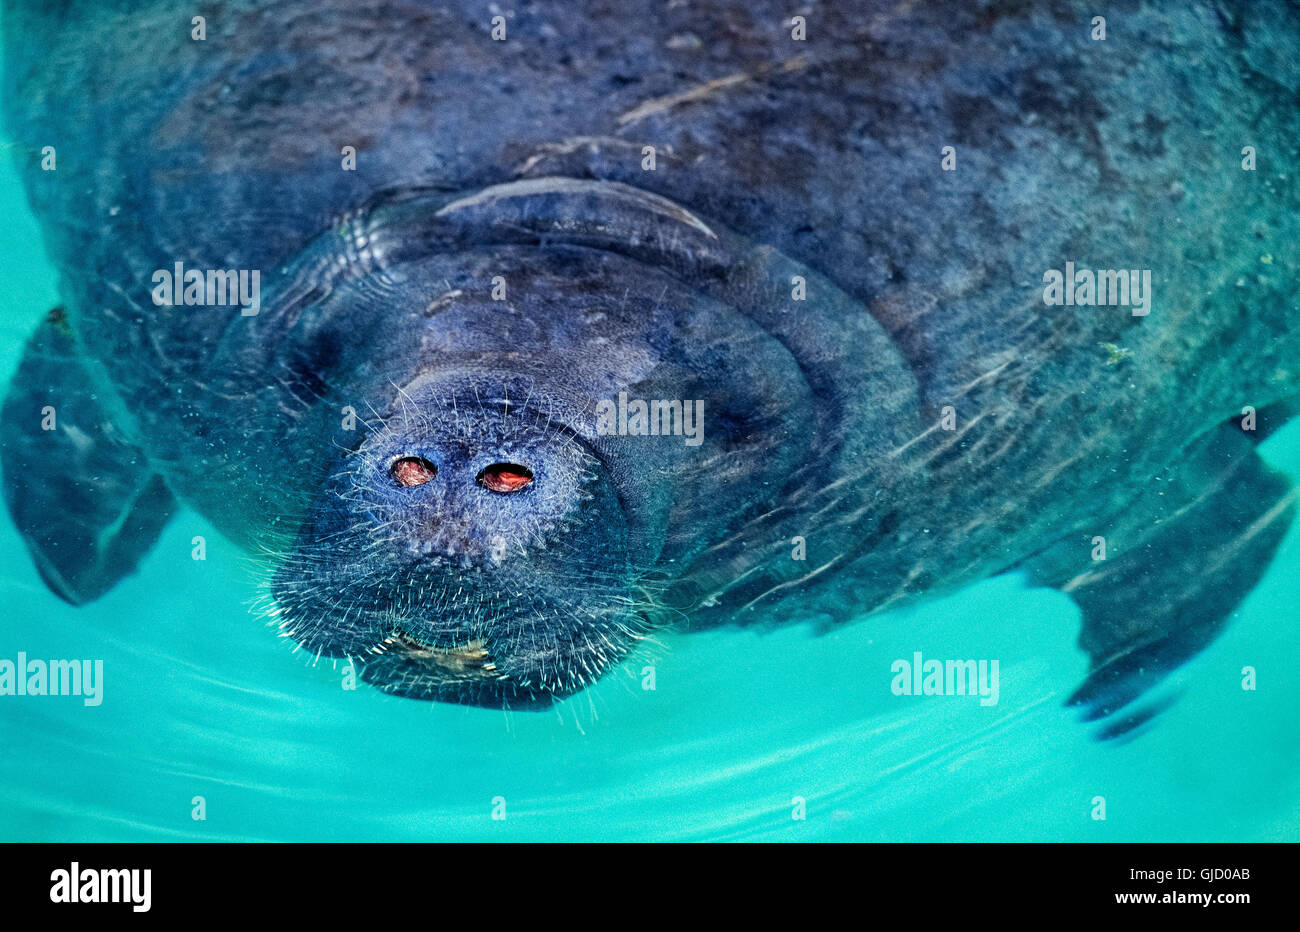 The snout of a West Indian manatee (Trichechus manatus) pokes above the water to reveal its two nostrils for breathing and the whiskers that are believed to serve some sort of sensory function for this marine mammal that is also called a sea cow. Stock Photo